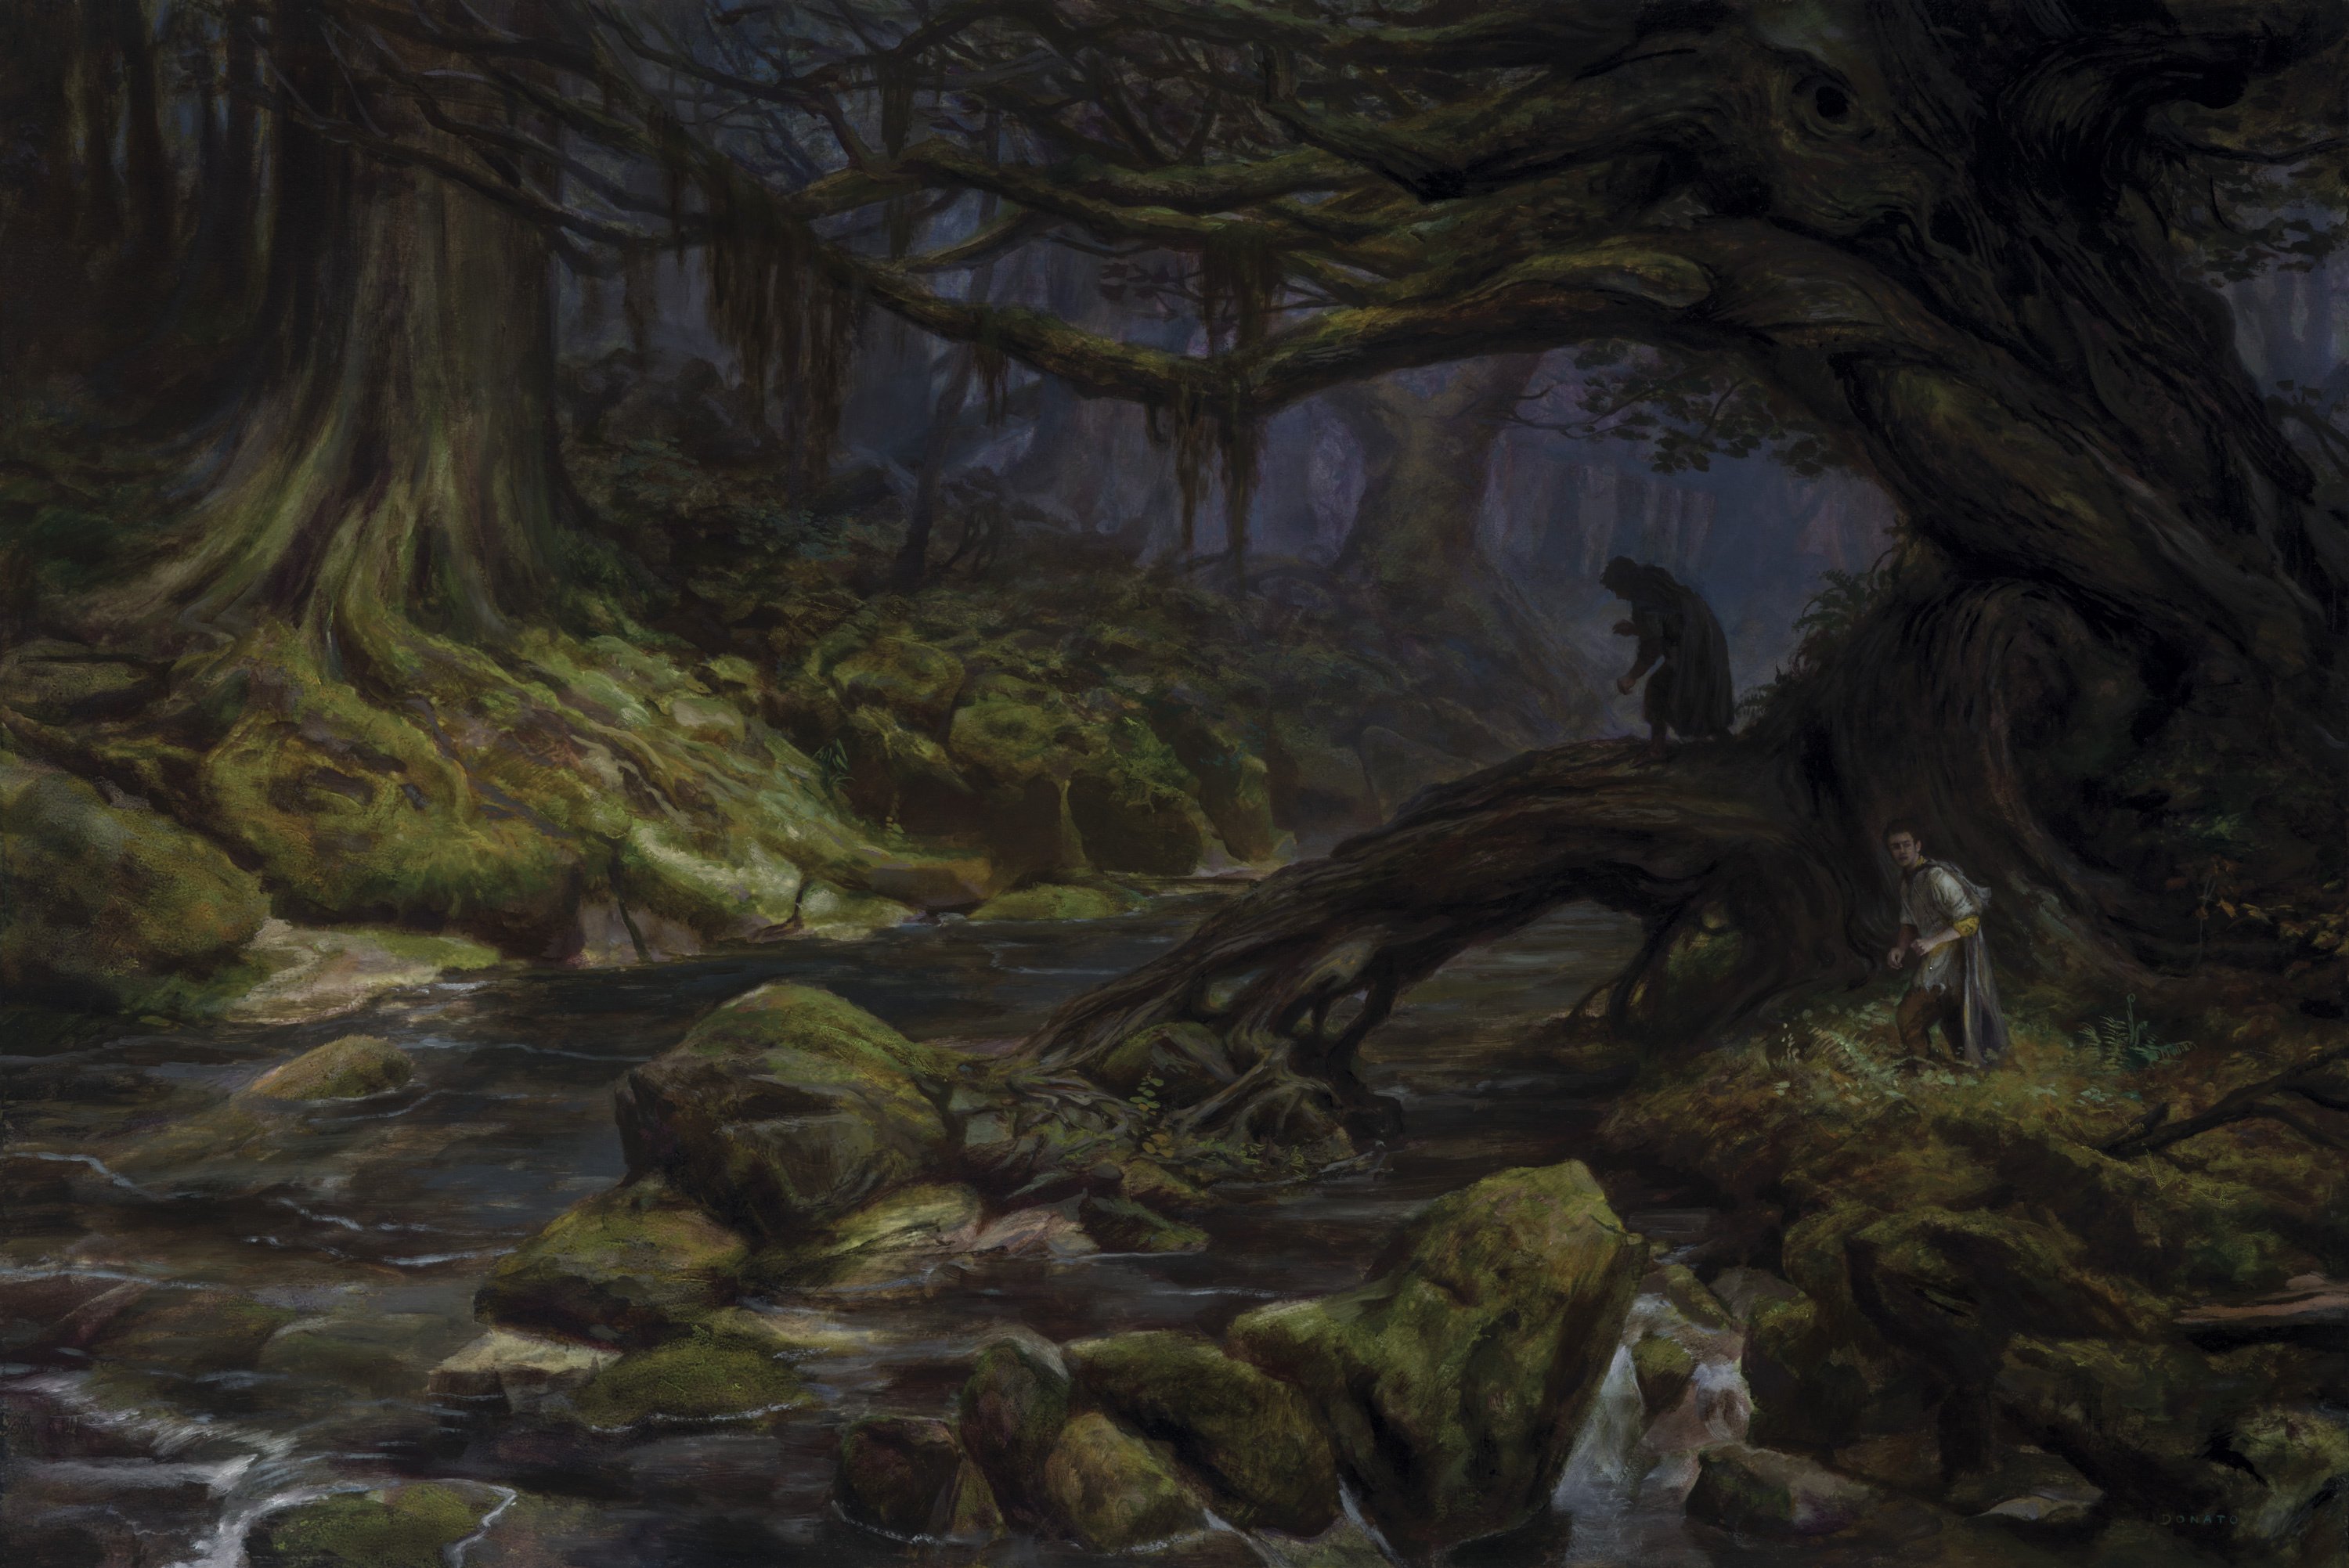 Fangorn Forest - Merry and Pippin
24" x 36" Oil on Panel  2018
private collection